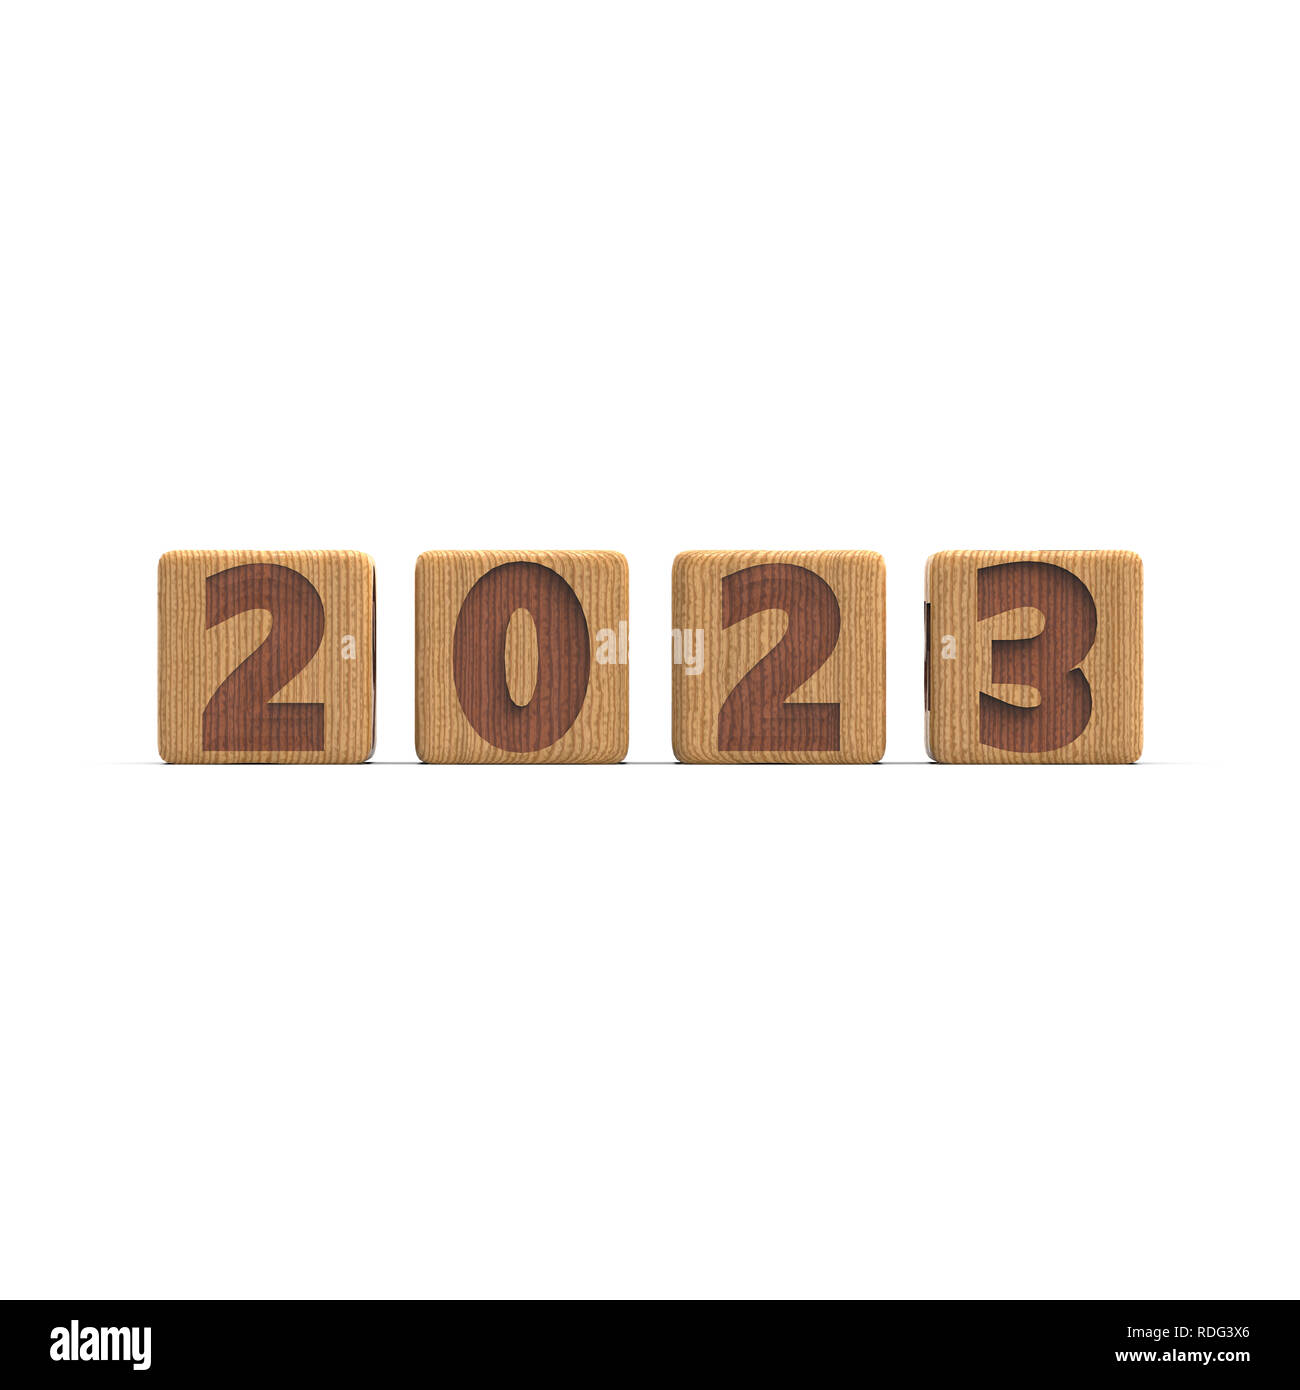 The Year 2023 sign on in pure white background Stock Photo - Alamy